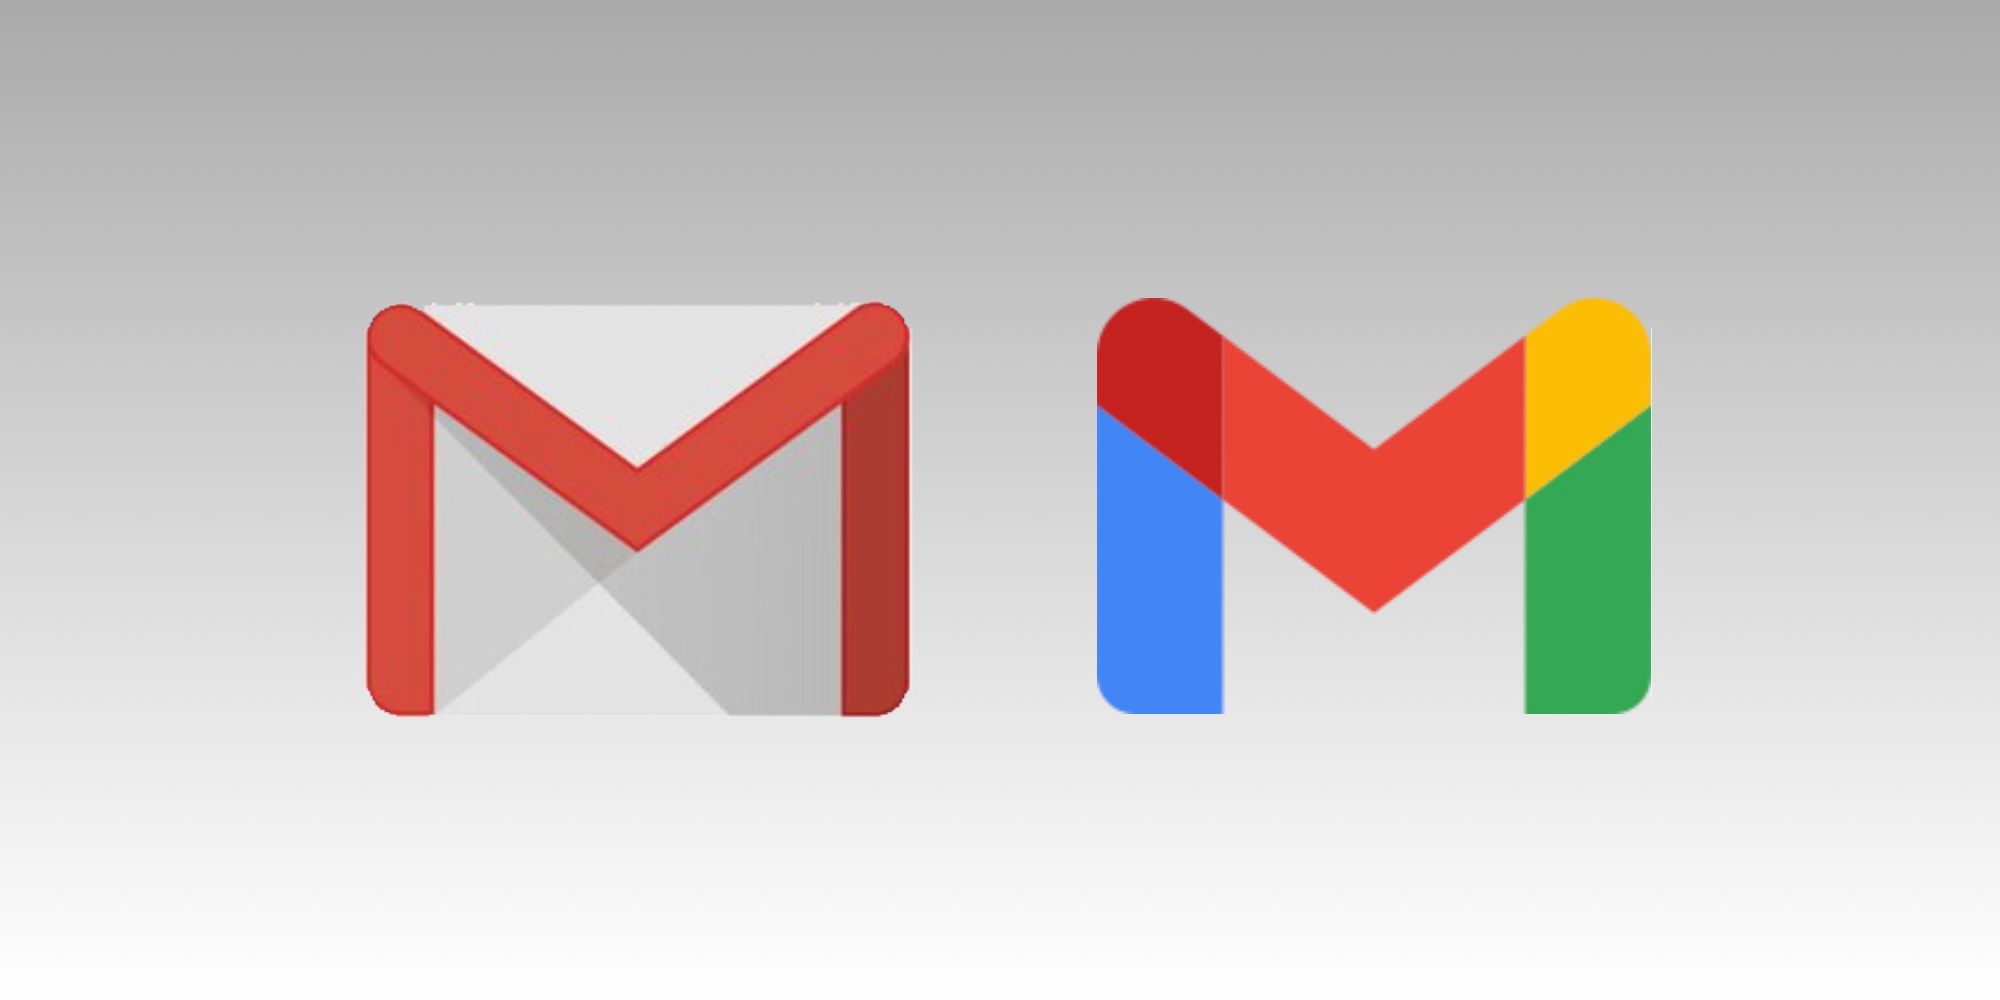 Gmail's 2013 logo and its 2020 logo